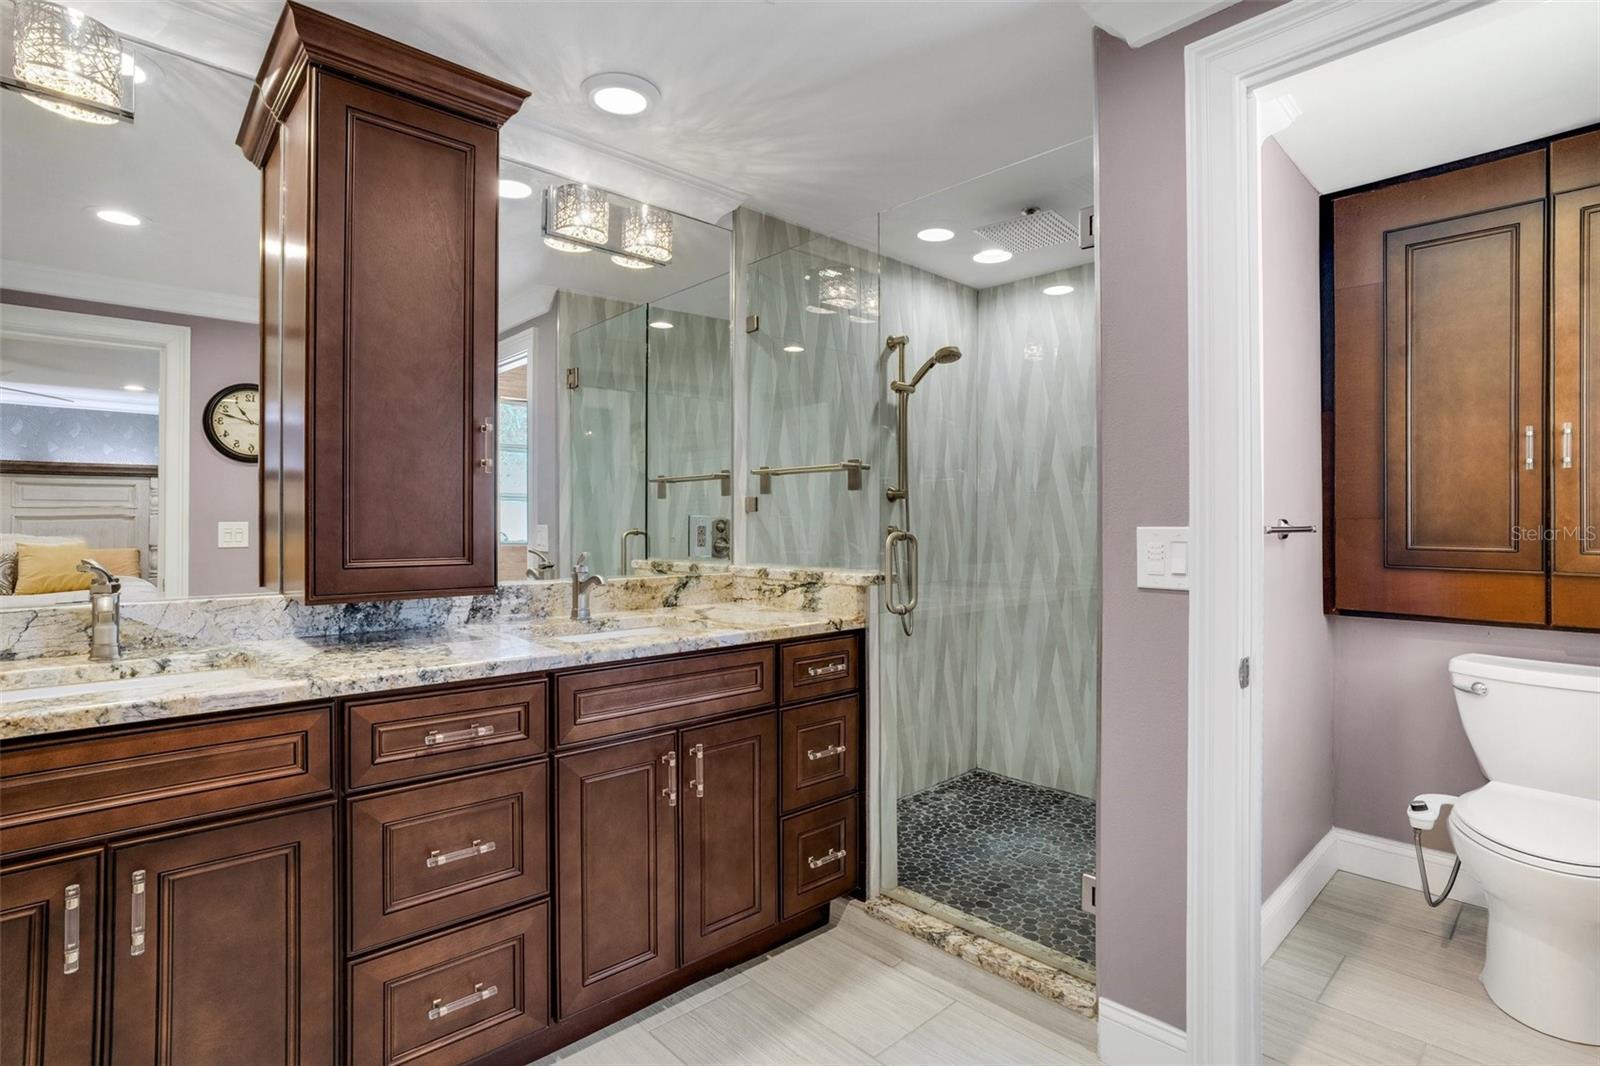 Primary Bathroom with 2 sinks, extra large shower, hotwater on demand and solid wood cabinets